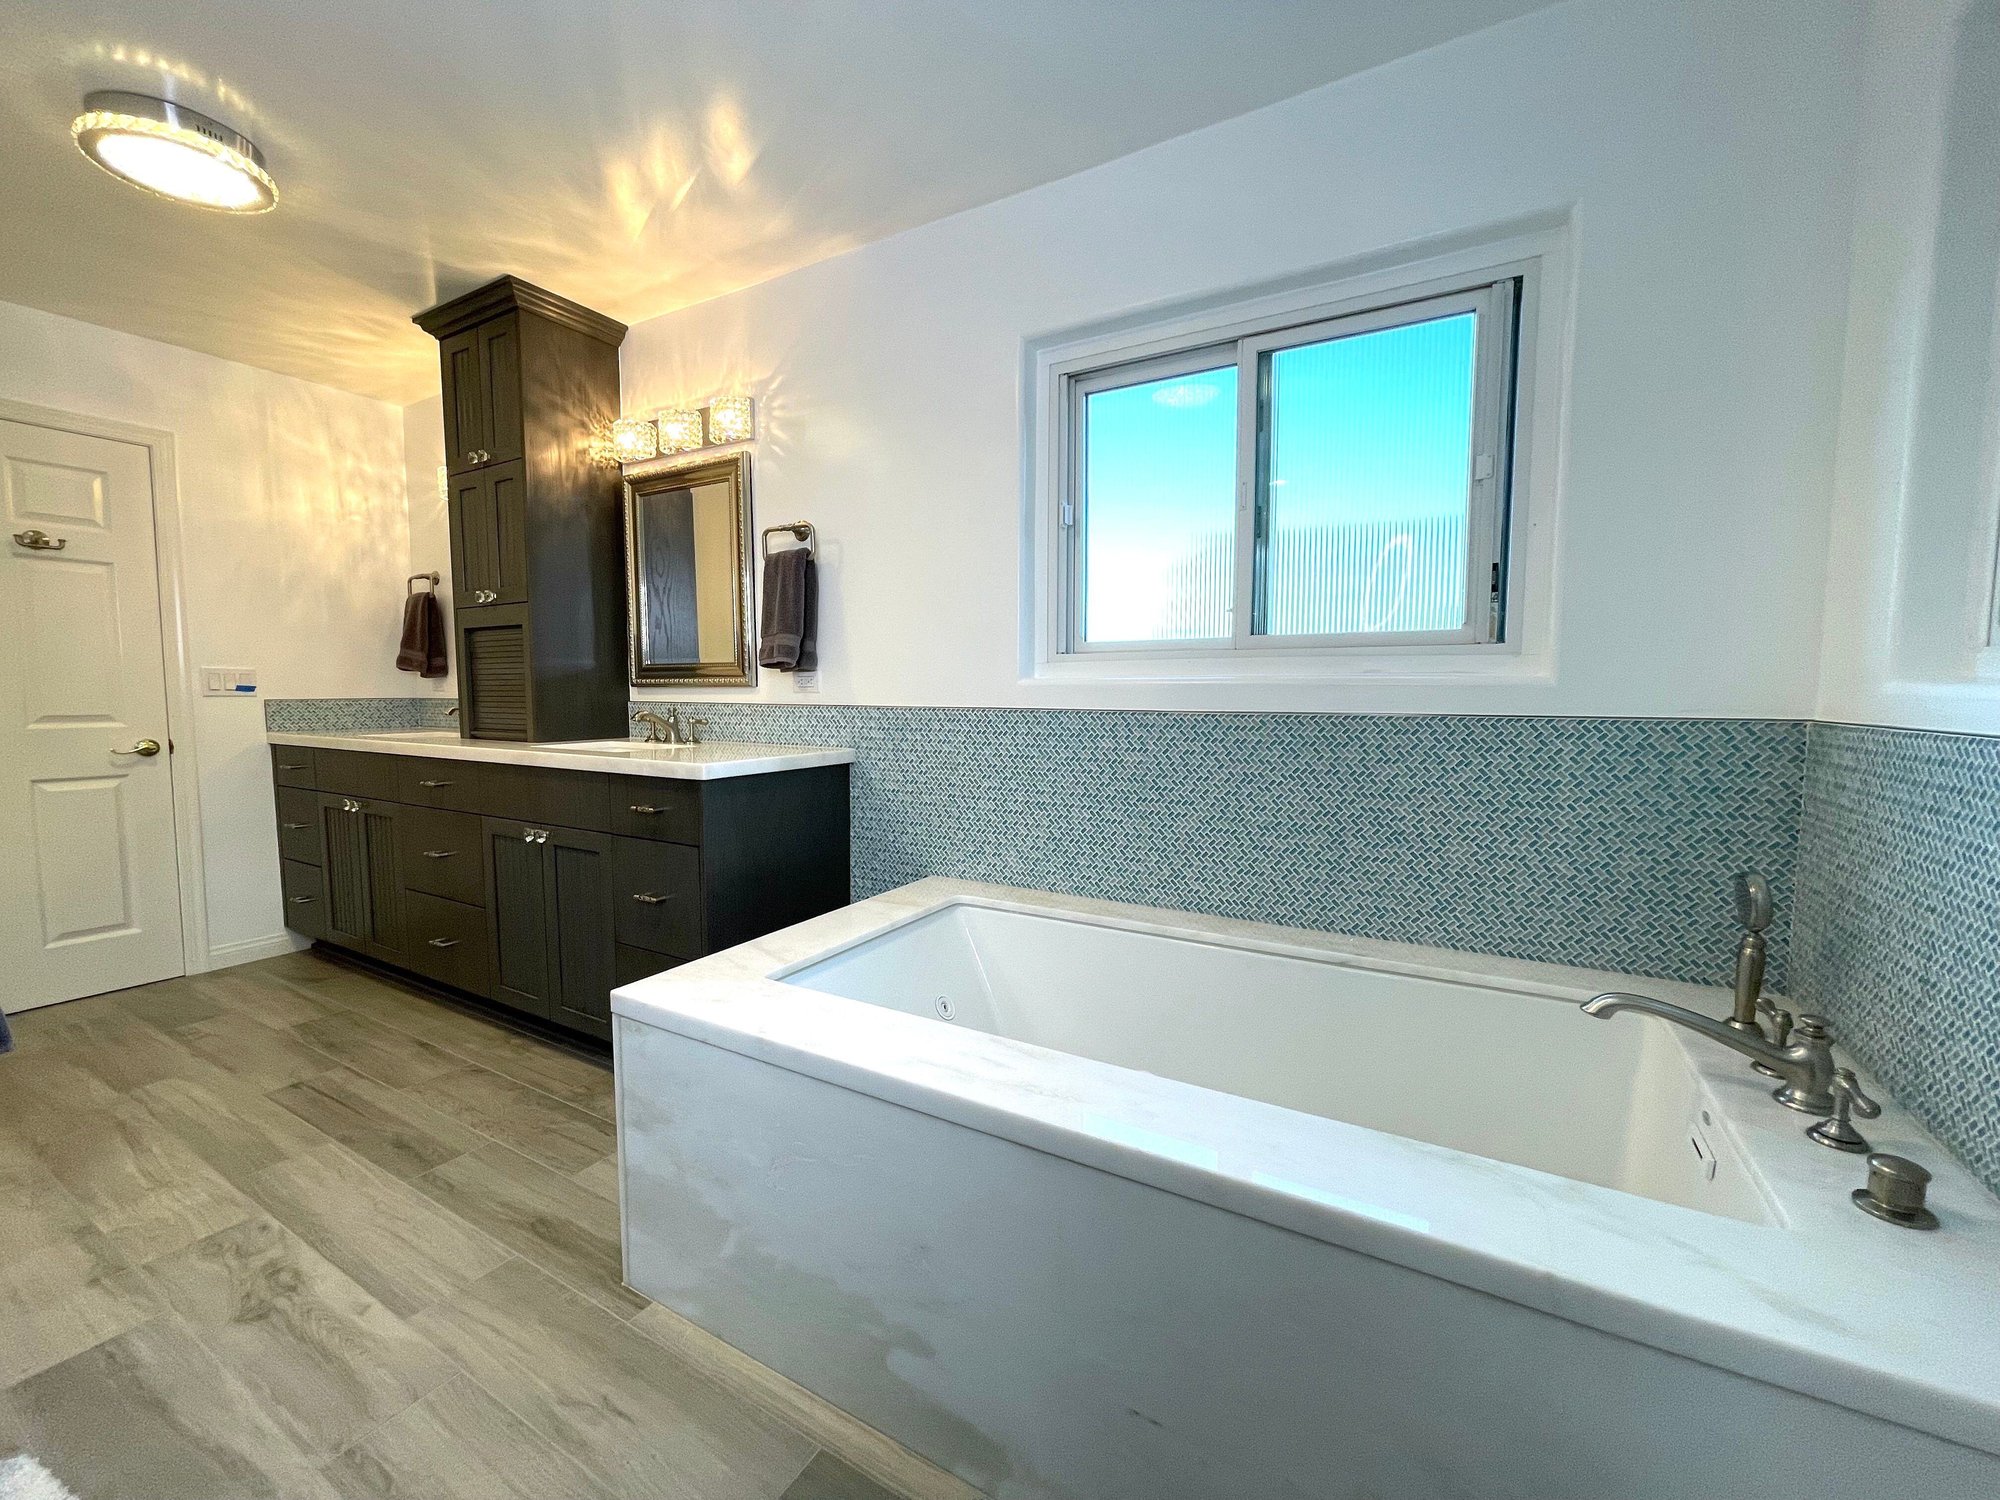 jacuzzi tub - Master bathroom remodel - best south bay - bay cities construction